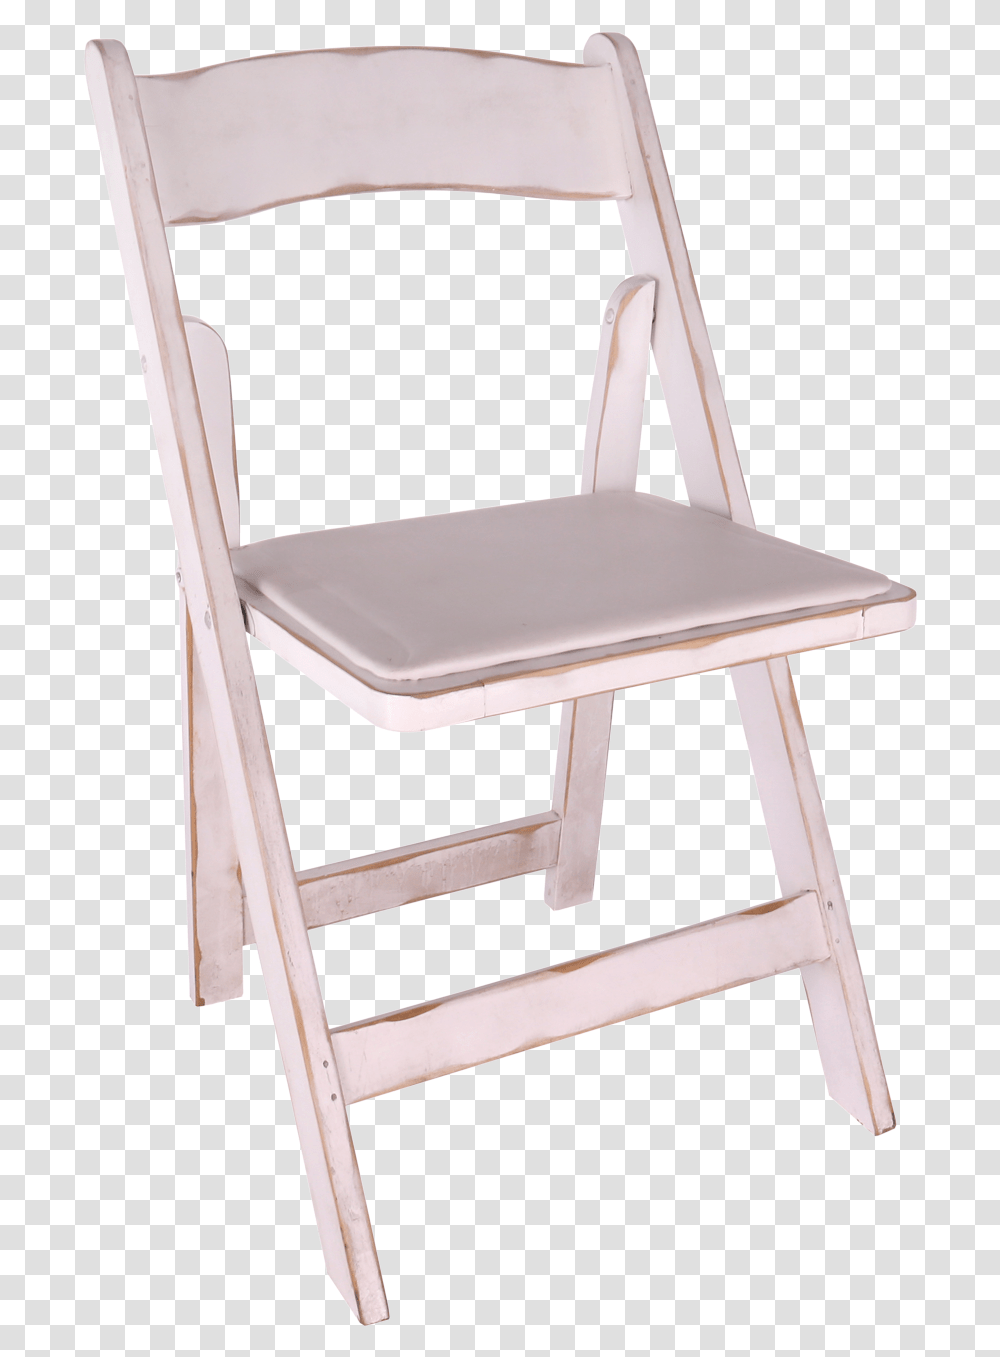 Chair Wood Folding Shabby Chic Folding Chair, Furniture, Canvas Transparent Png